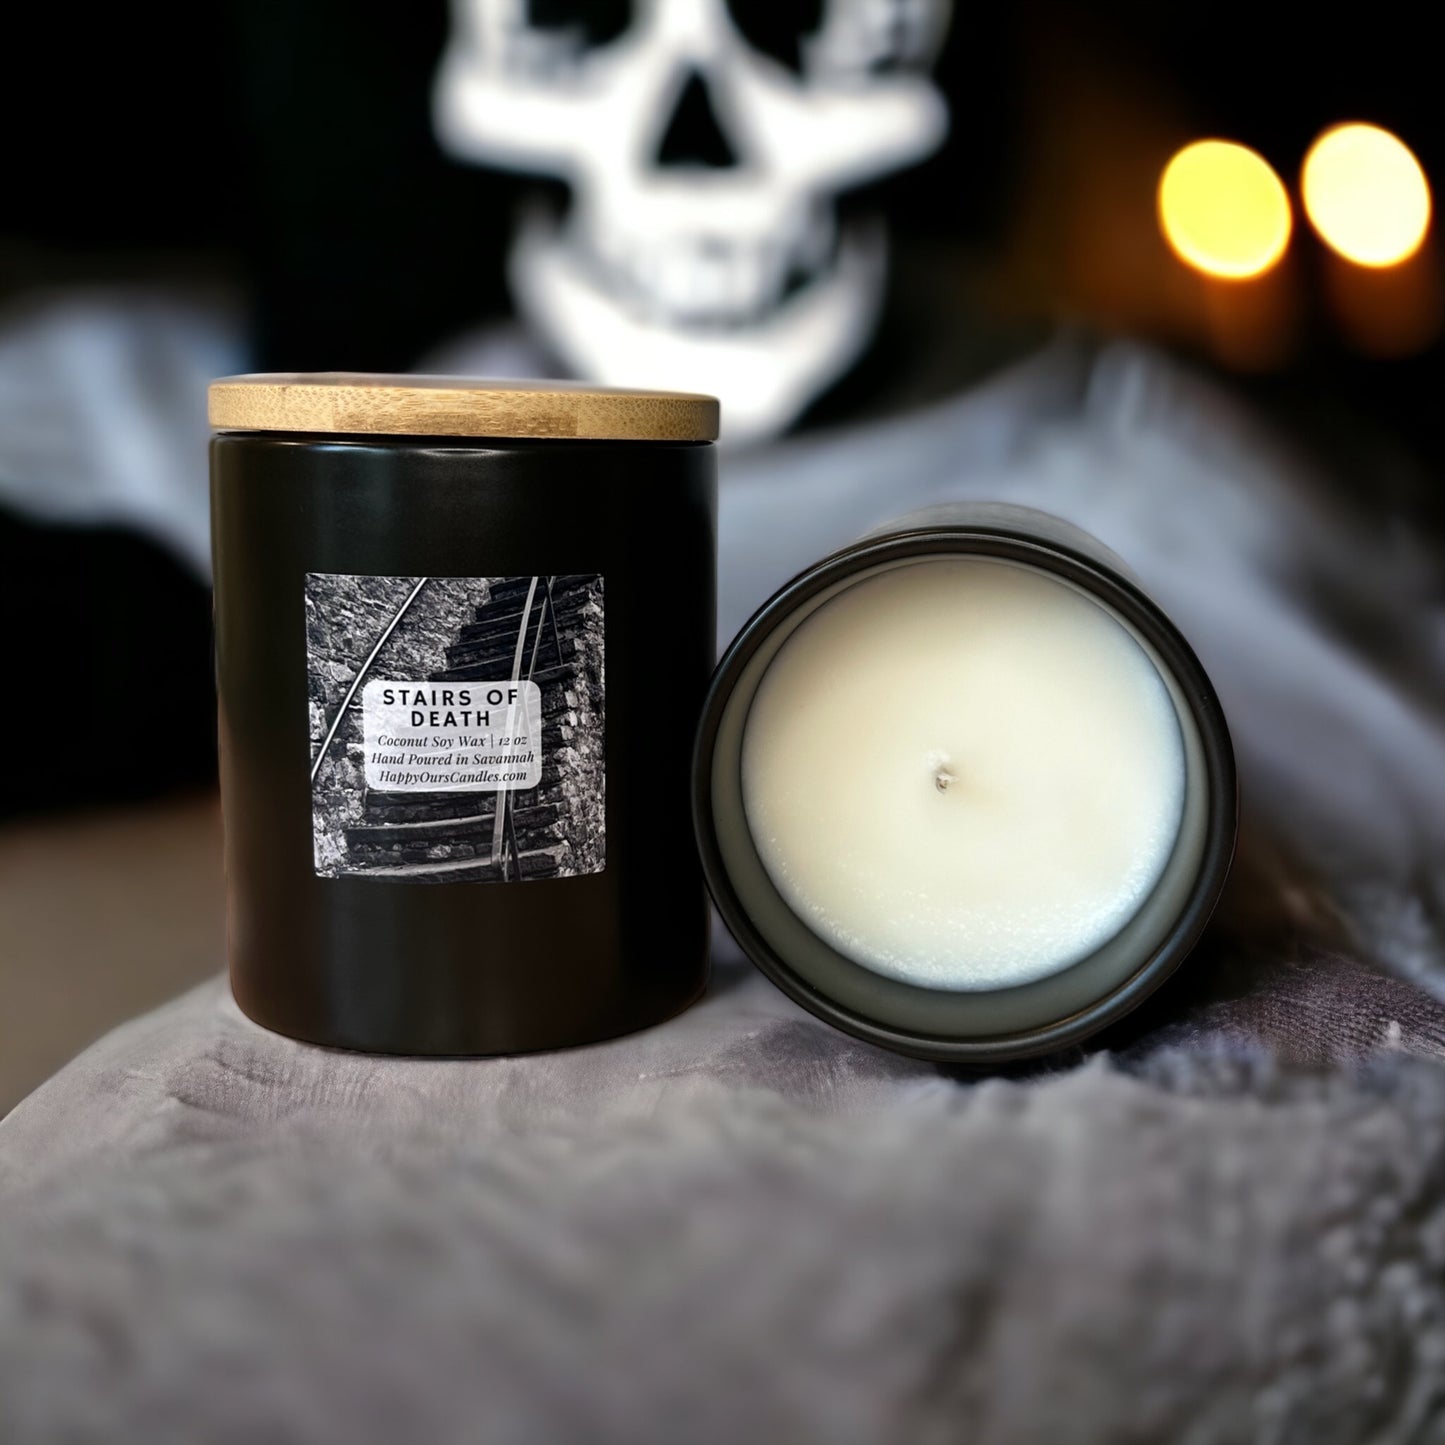 Stairs of Death Scented Candle 12 oz